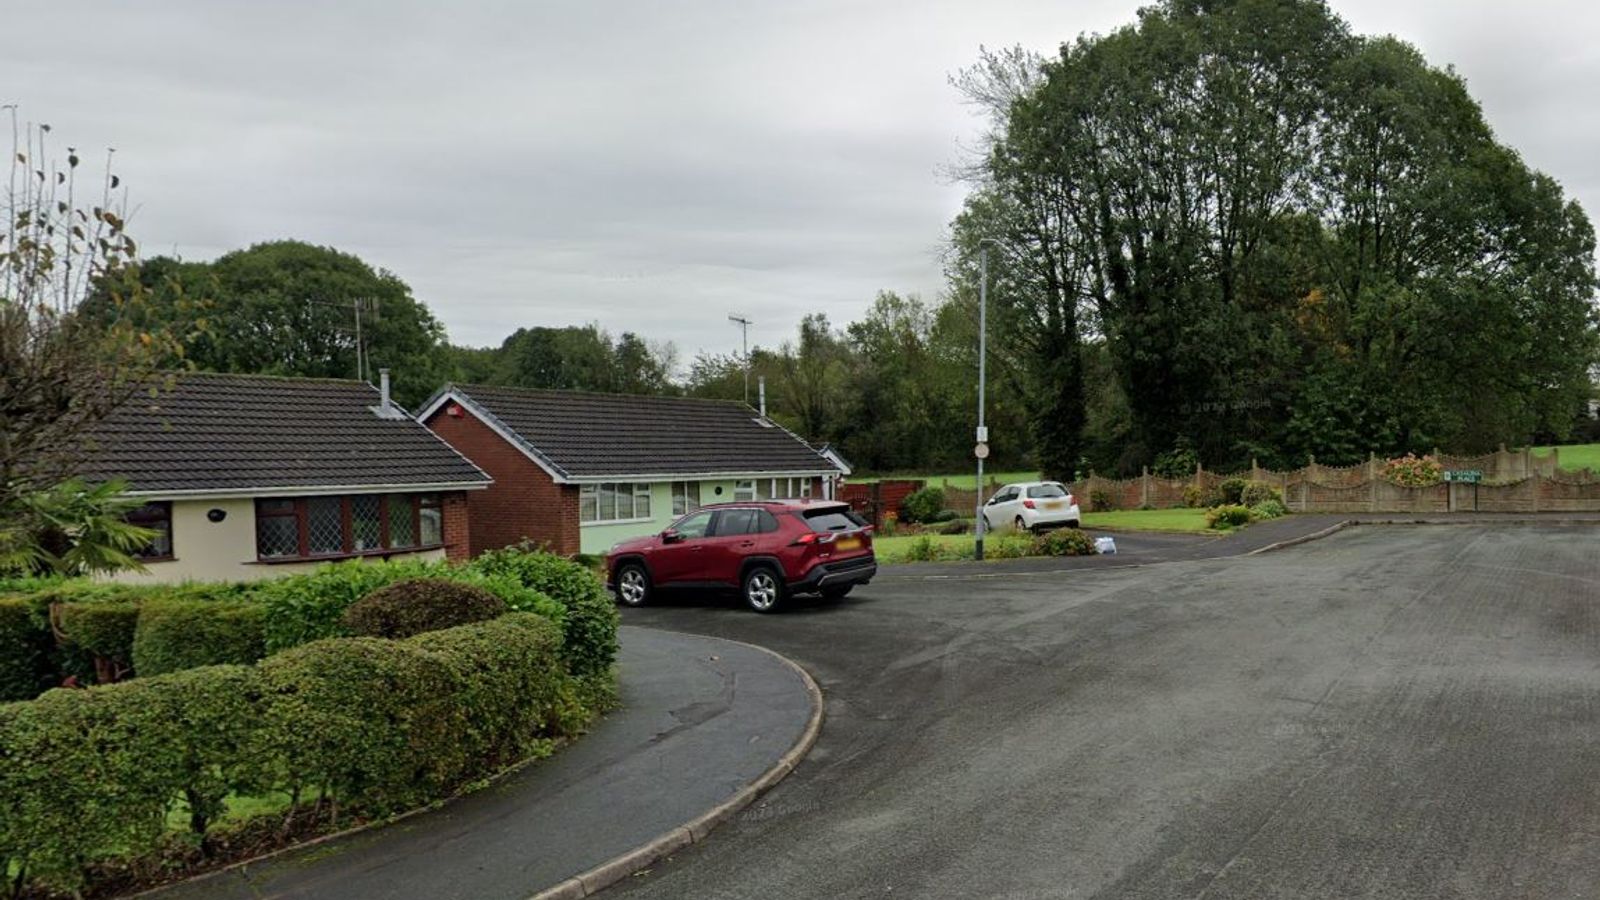 Police investigating after man and woman in 70s found dead in Stoke-on-Trent